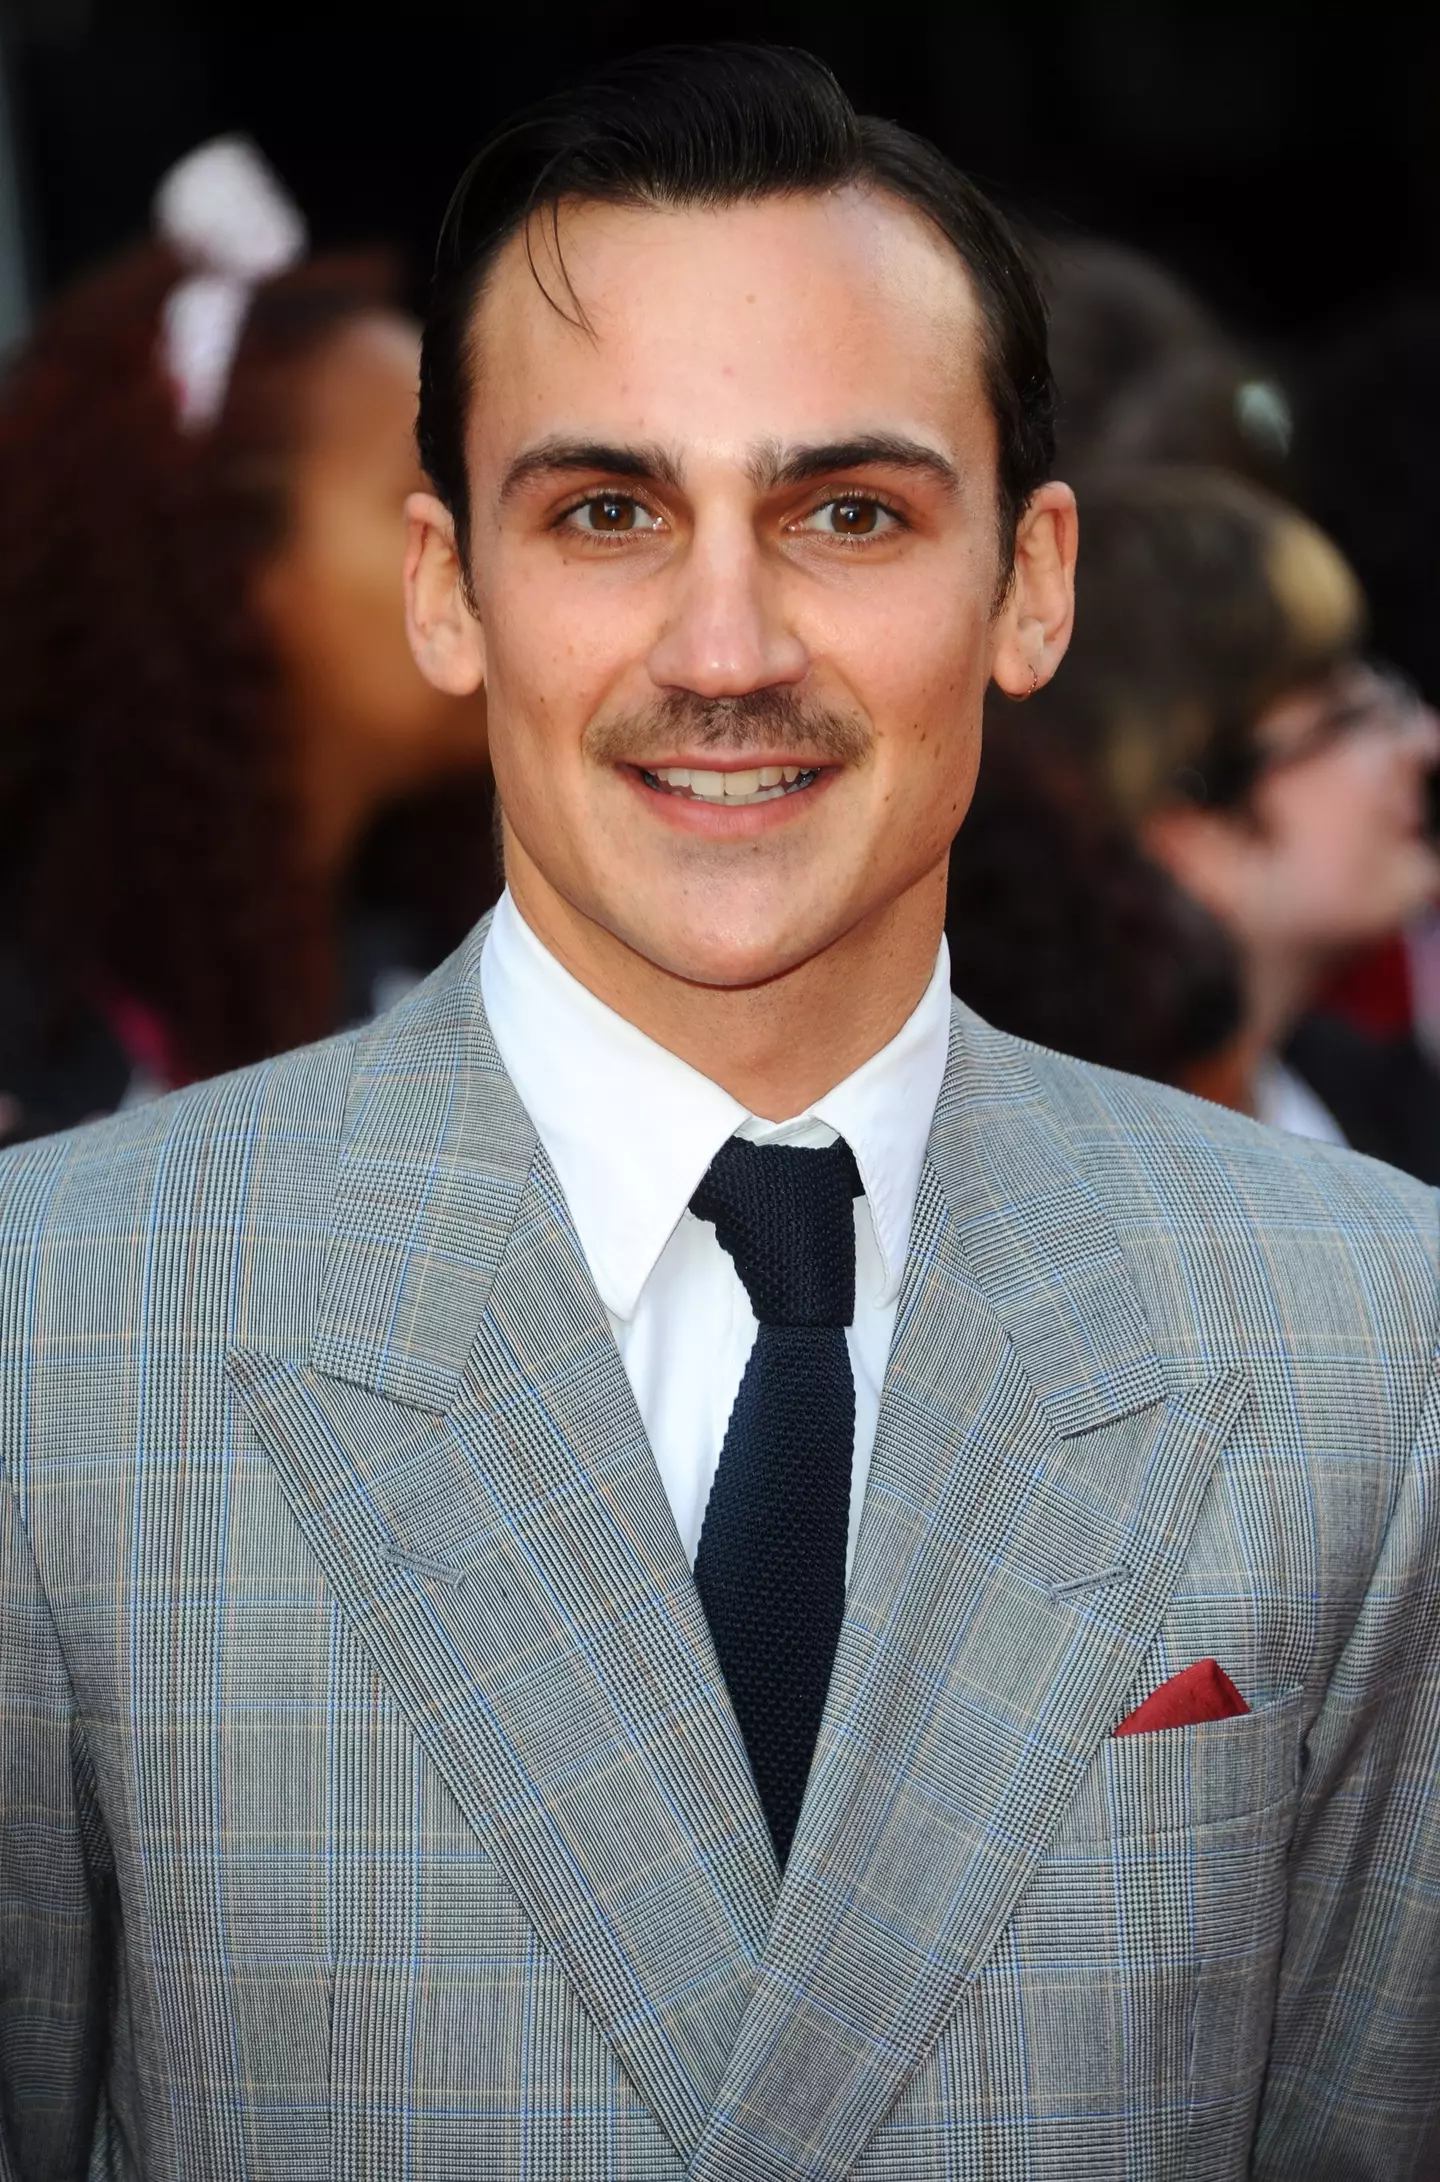 Fans of The Inbetweeners have been left gobsmacked after learning that actor Henry Lloyd-Hughes sounds totally different to his character.